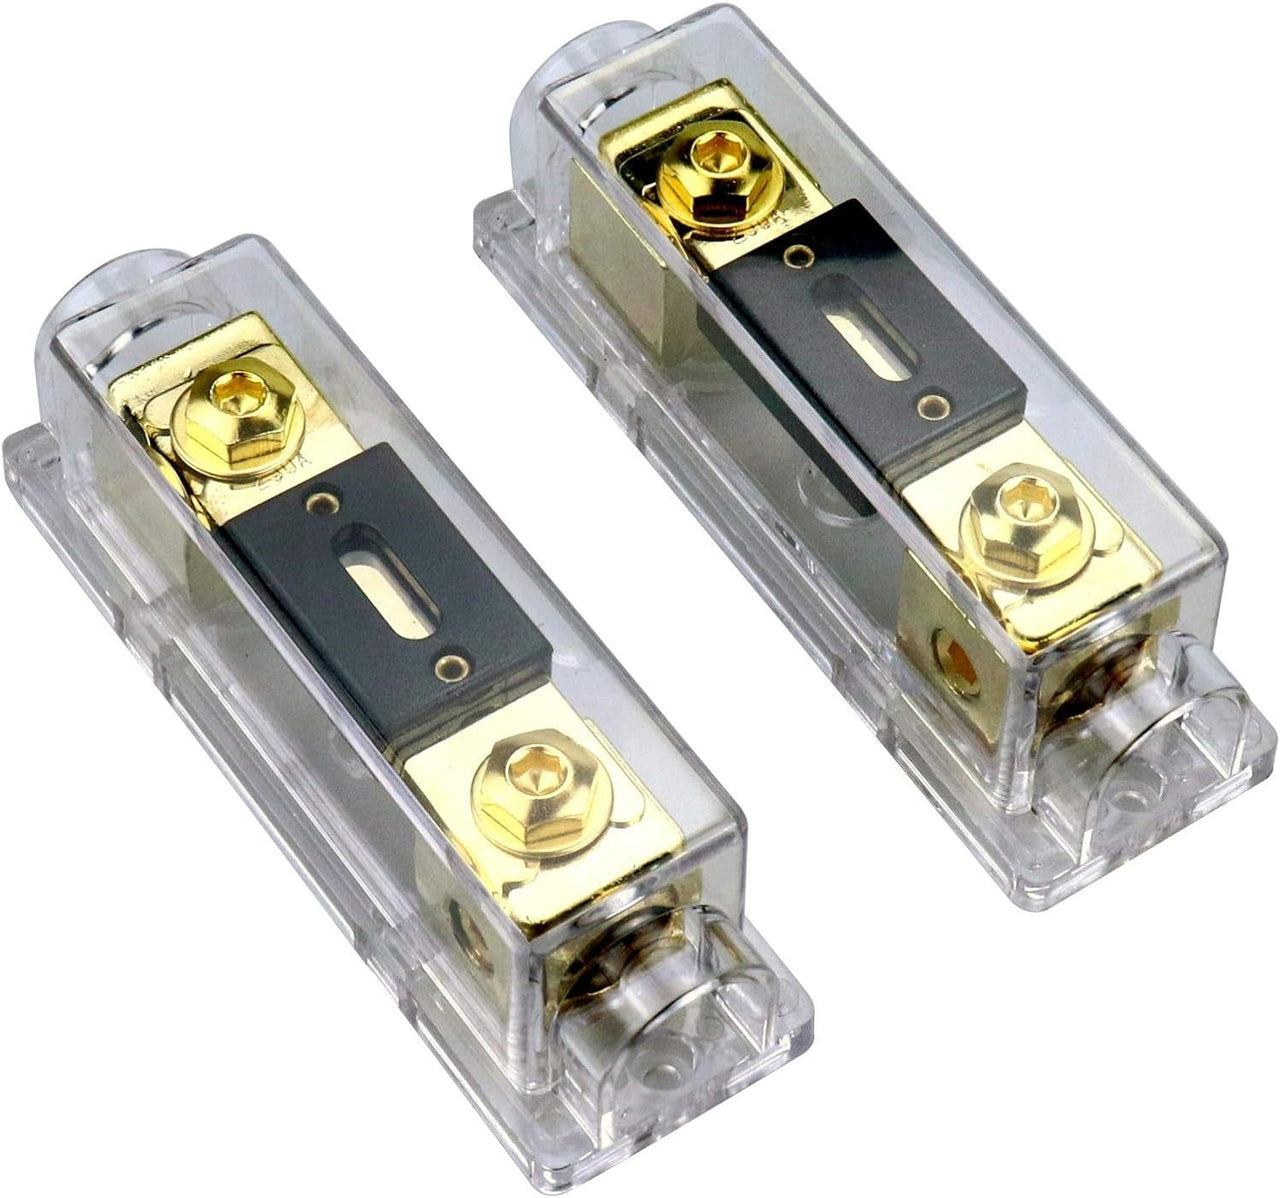 2 Absolute ANH-3 0/2/4 Gauge AWG in-Line ANL Fuse Holder & 2 Gold Plated 120 Amp Fuse